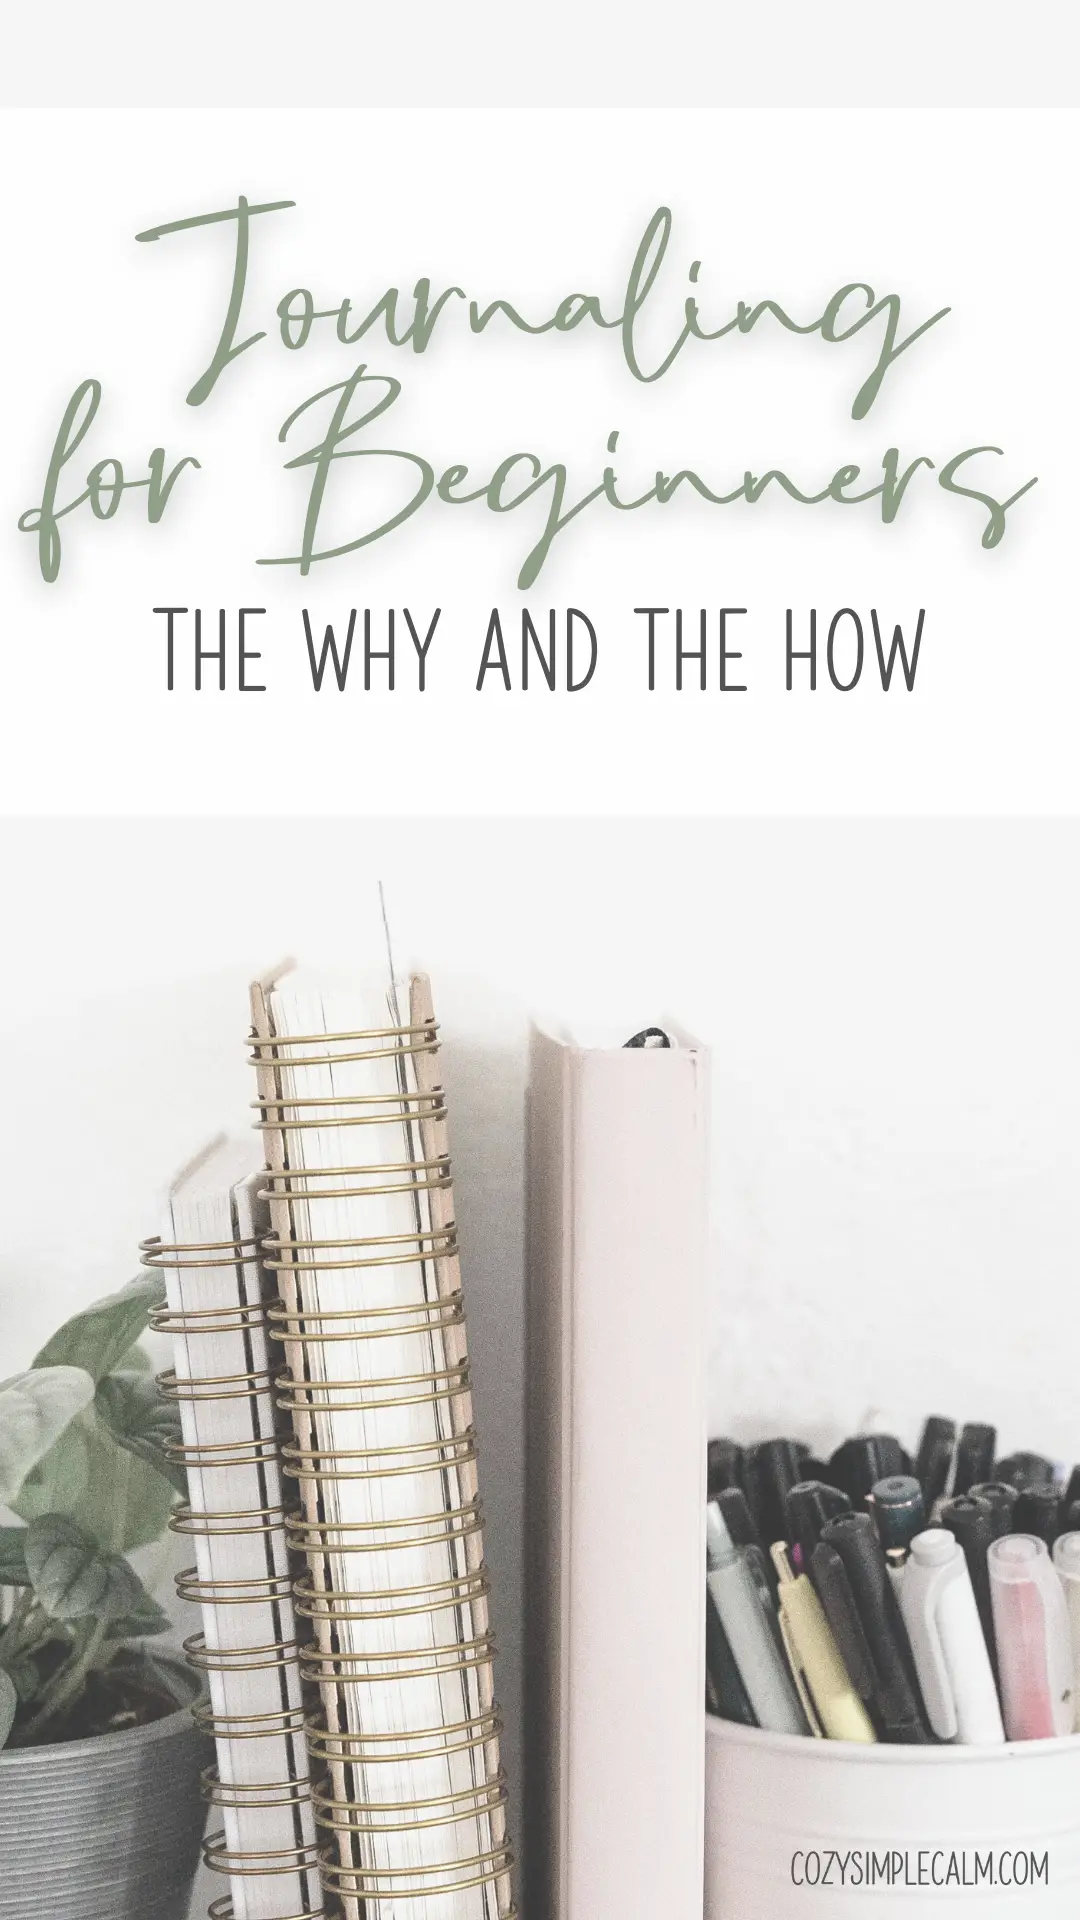 Image of shelf with journals and pens - text overlay: Journaling for beginners: The why and the how